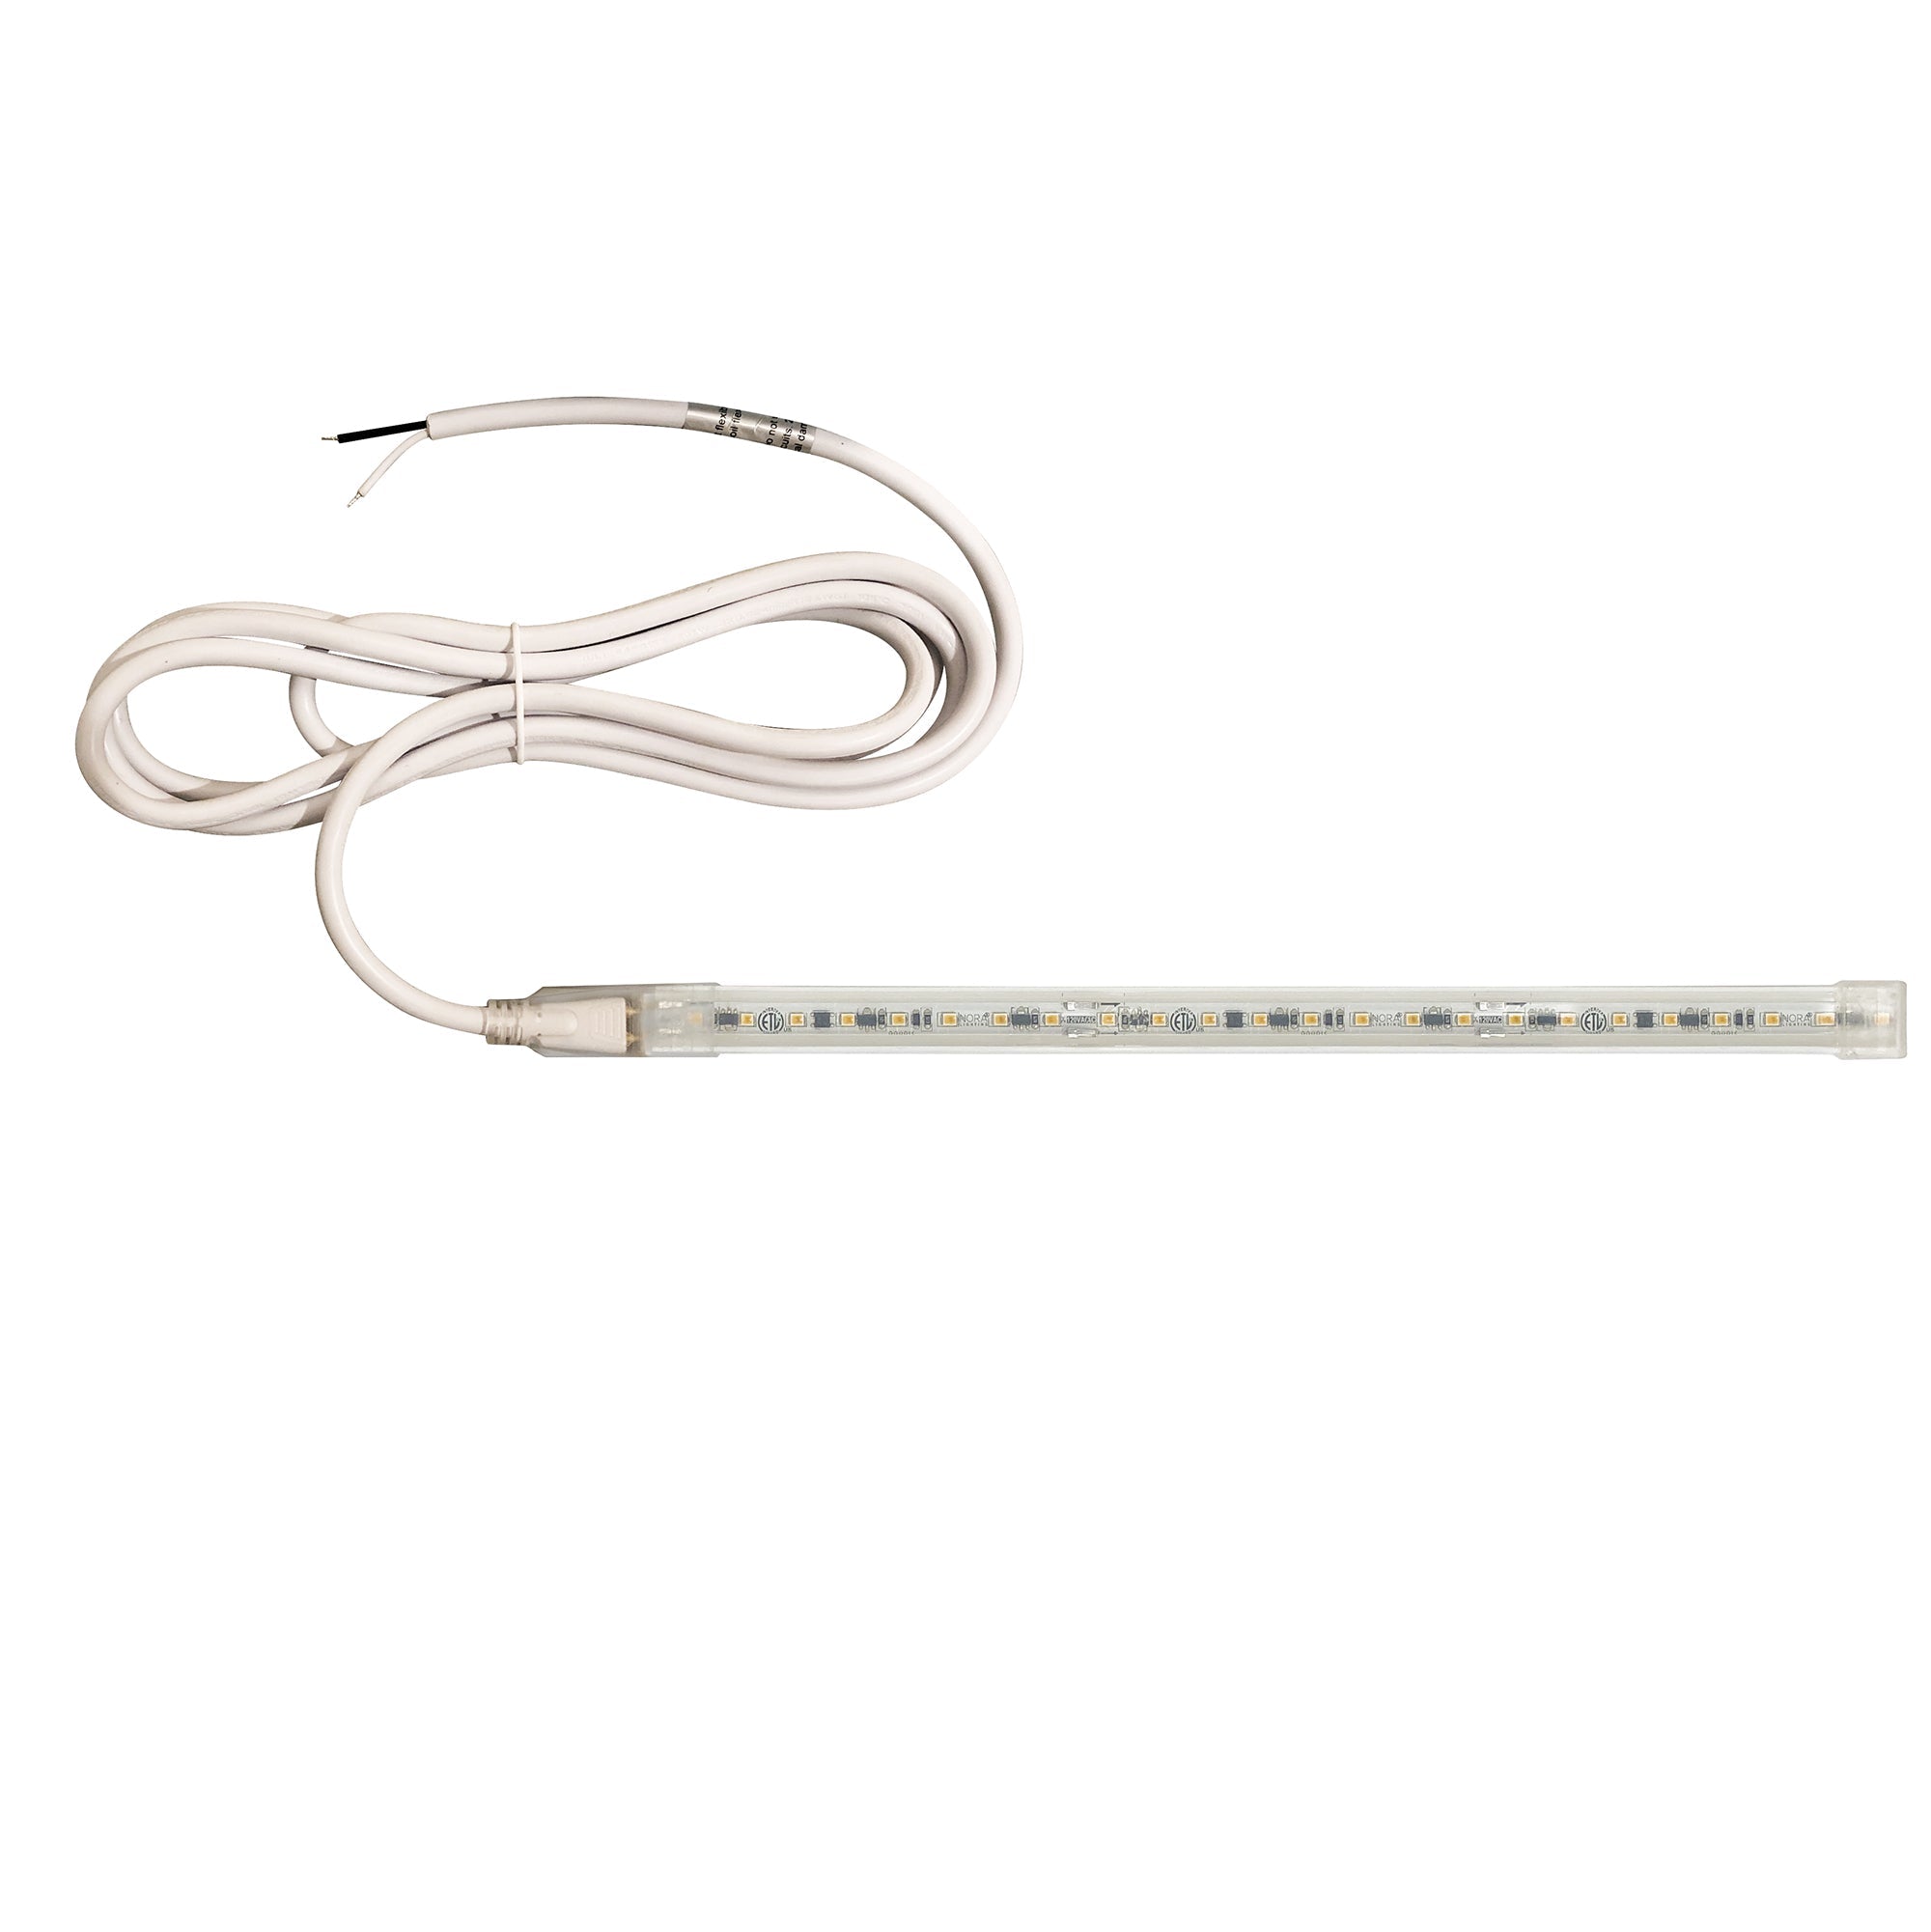 Nora Lighting NUTP13-W44-12-930/HW - Accent / Undercabinet - Custom Cut 44-ft 120V Continuous LED Tape Light, 330lm / 3.6W per foot, 3000K, w/ Mounting Clips and 8' Hardwired Power Cord